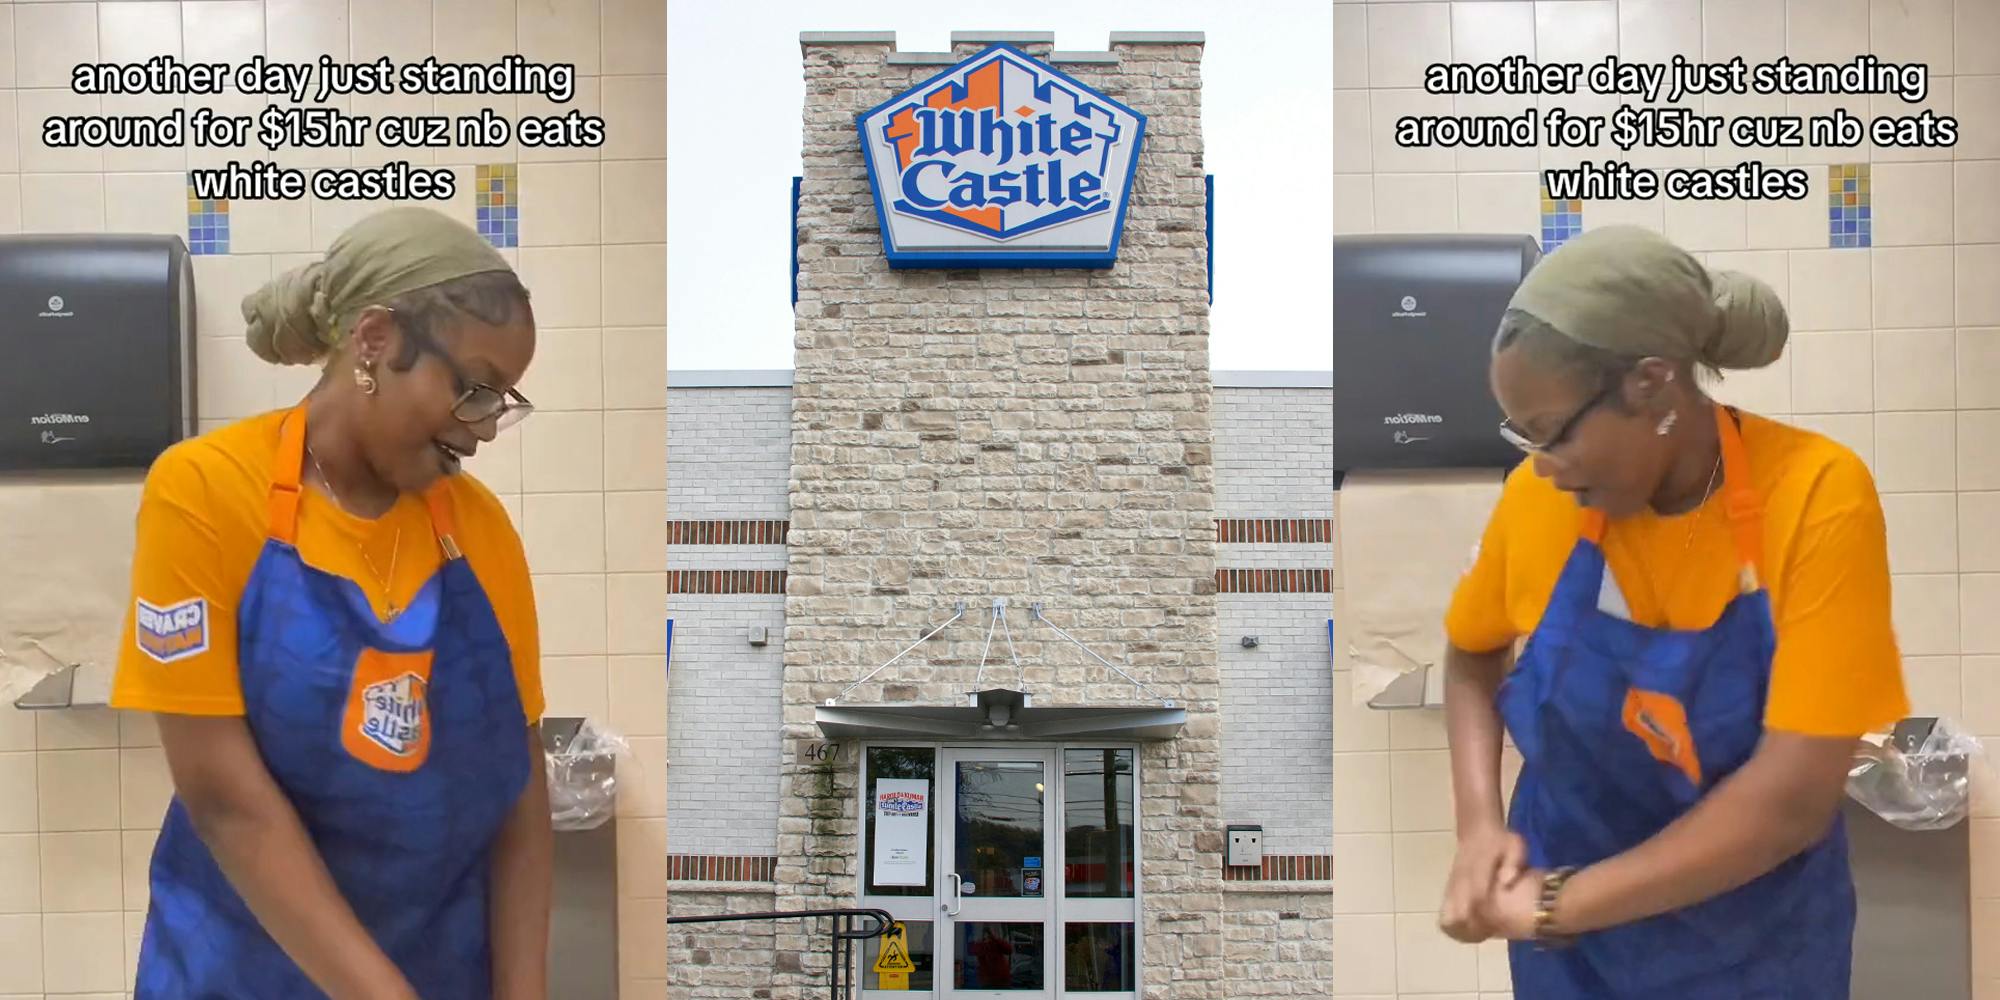 White Castle worker dancing with caption "another day just standing around for $15hr cuz nb eats white castles" (l) White Castle building with sign (c) White Castle worker dancing with caption "another day just standing around for $15hr cuz nb eats white castles" (r)